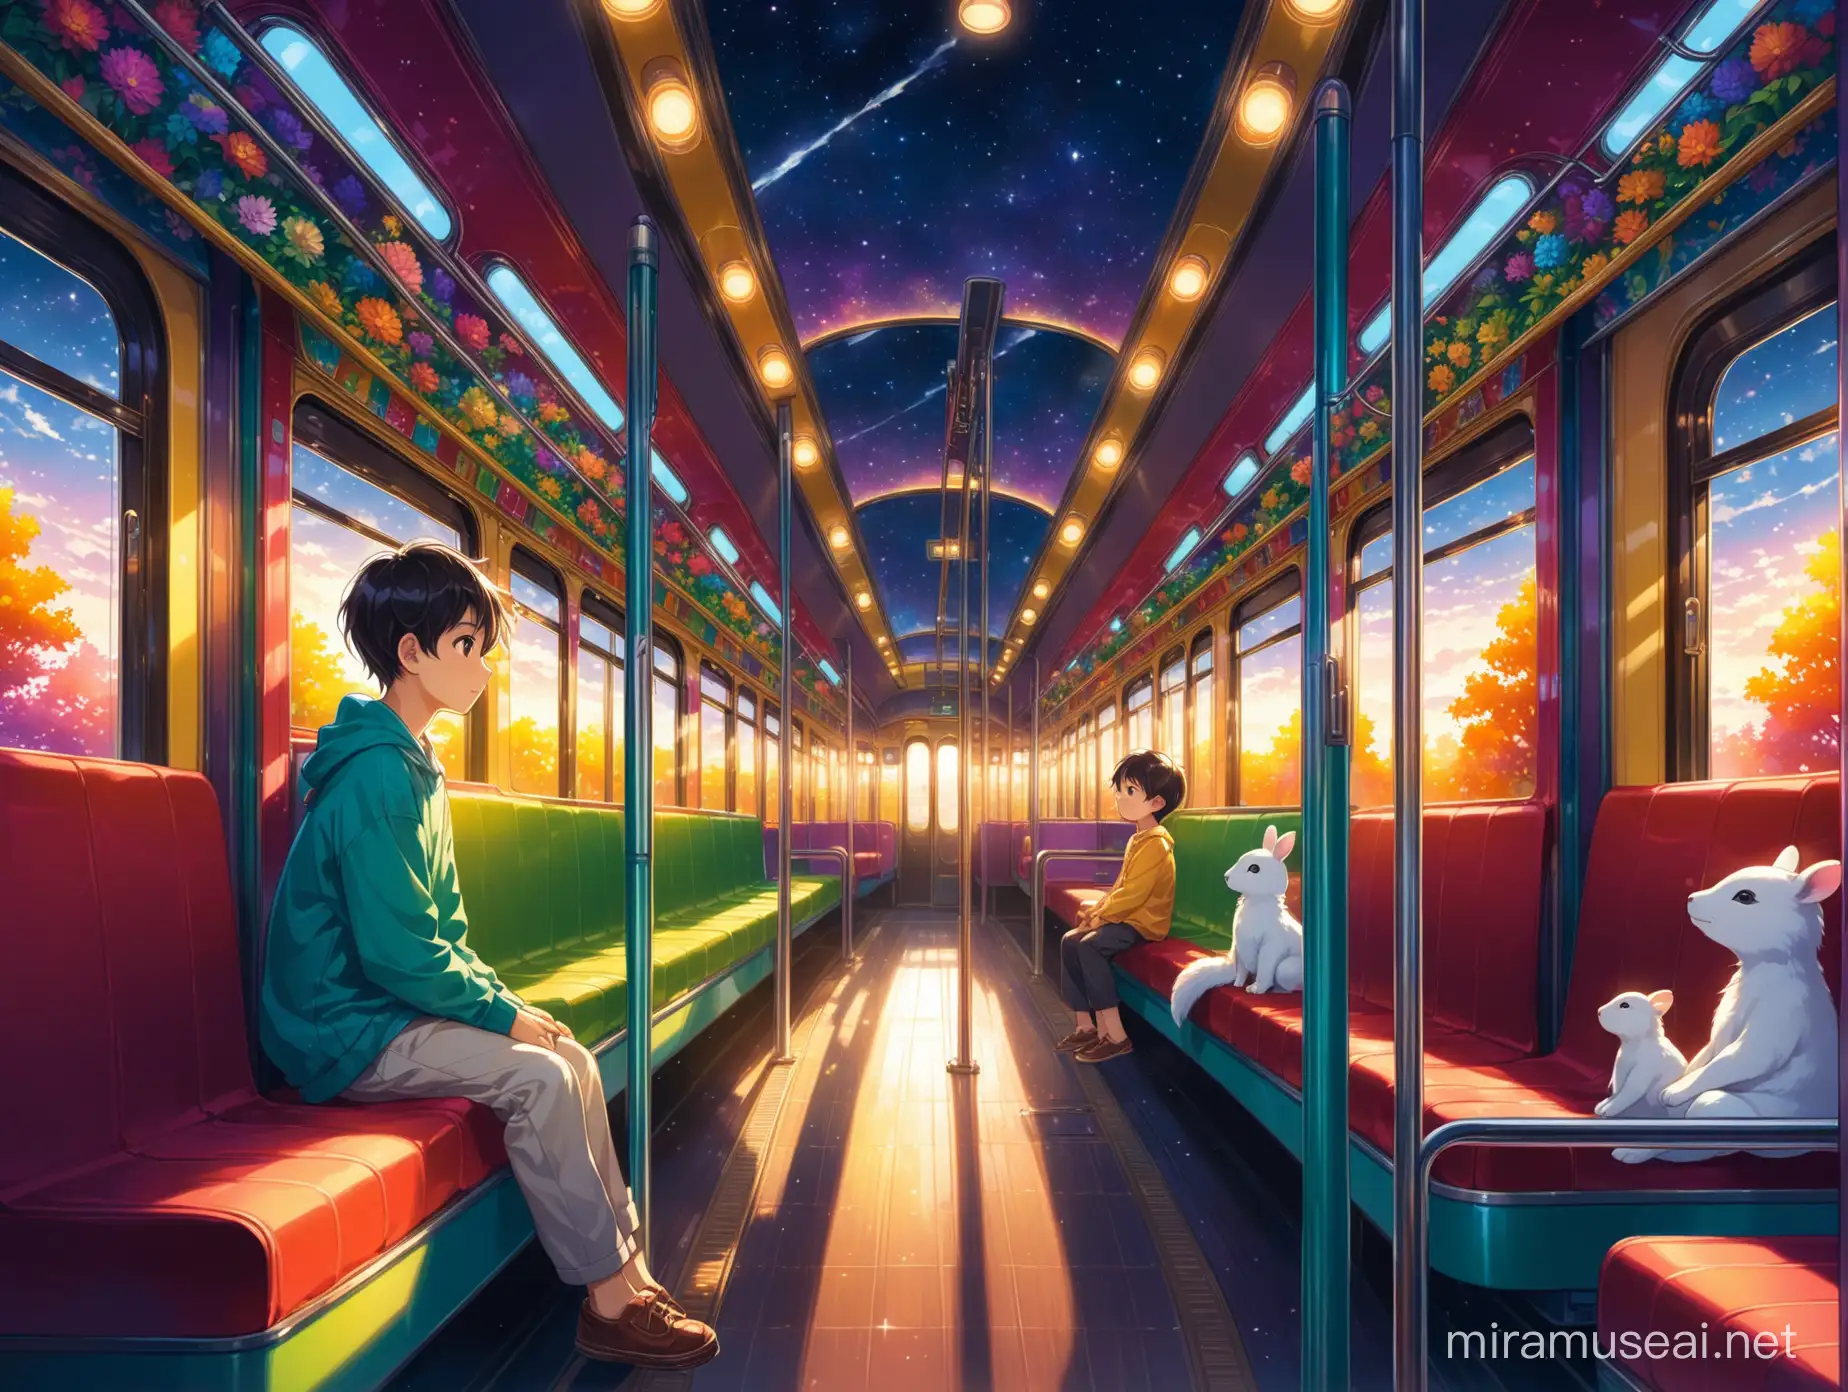 A boy playing a game in a dark room looked into the mirror and saw trees and a dark sky. The boy was sitting on the bed.









A girl stands on the electric train, colorful trees and flowers with sunlight shining on it, and various animals with colorful vases placed on the seats in the electric train.